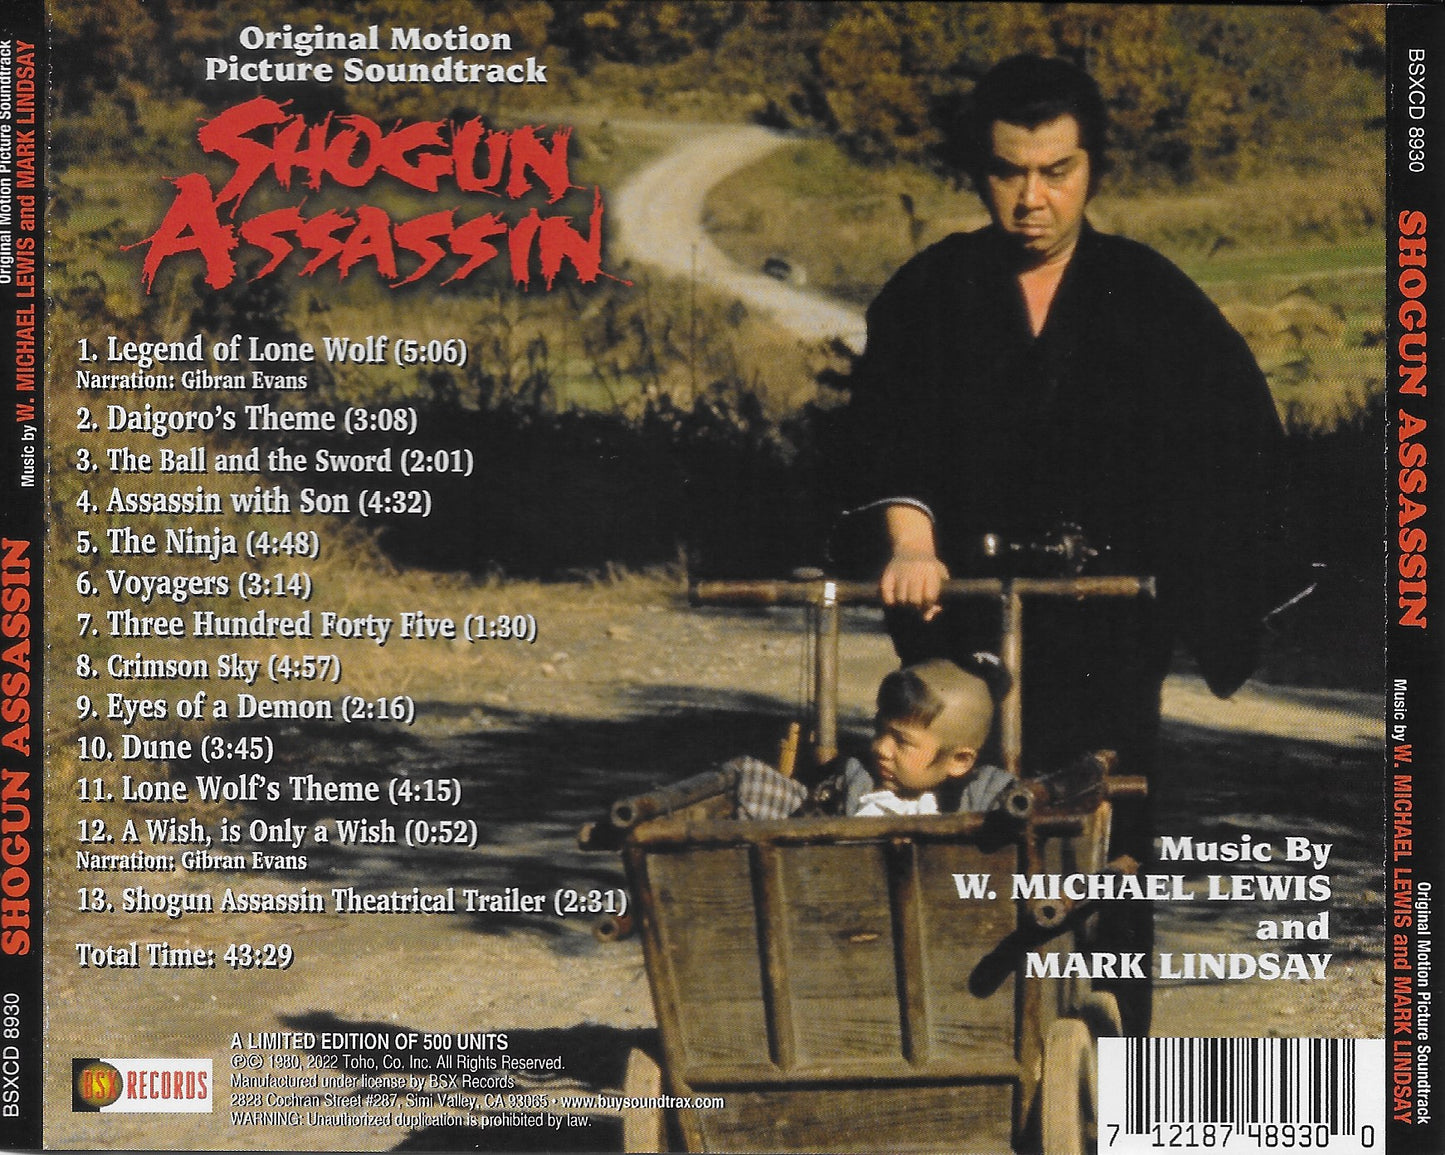 Cult-Classic Lindsay-Lewis-Scored SHOGUN ASSASSIN Original Tape Box 1 + CD - Personally Autographed to YOU